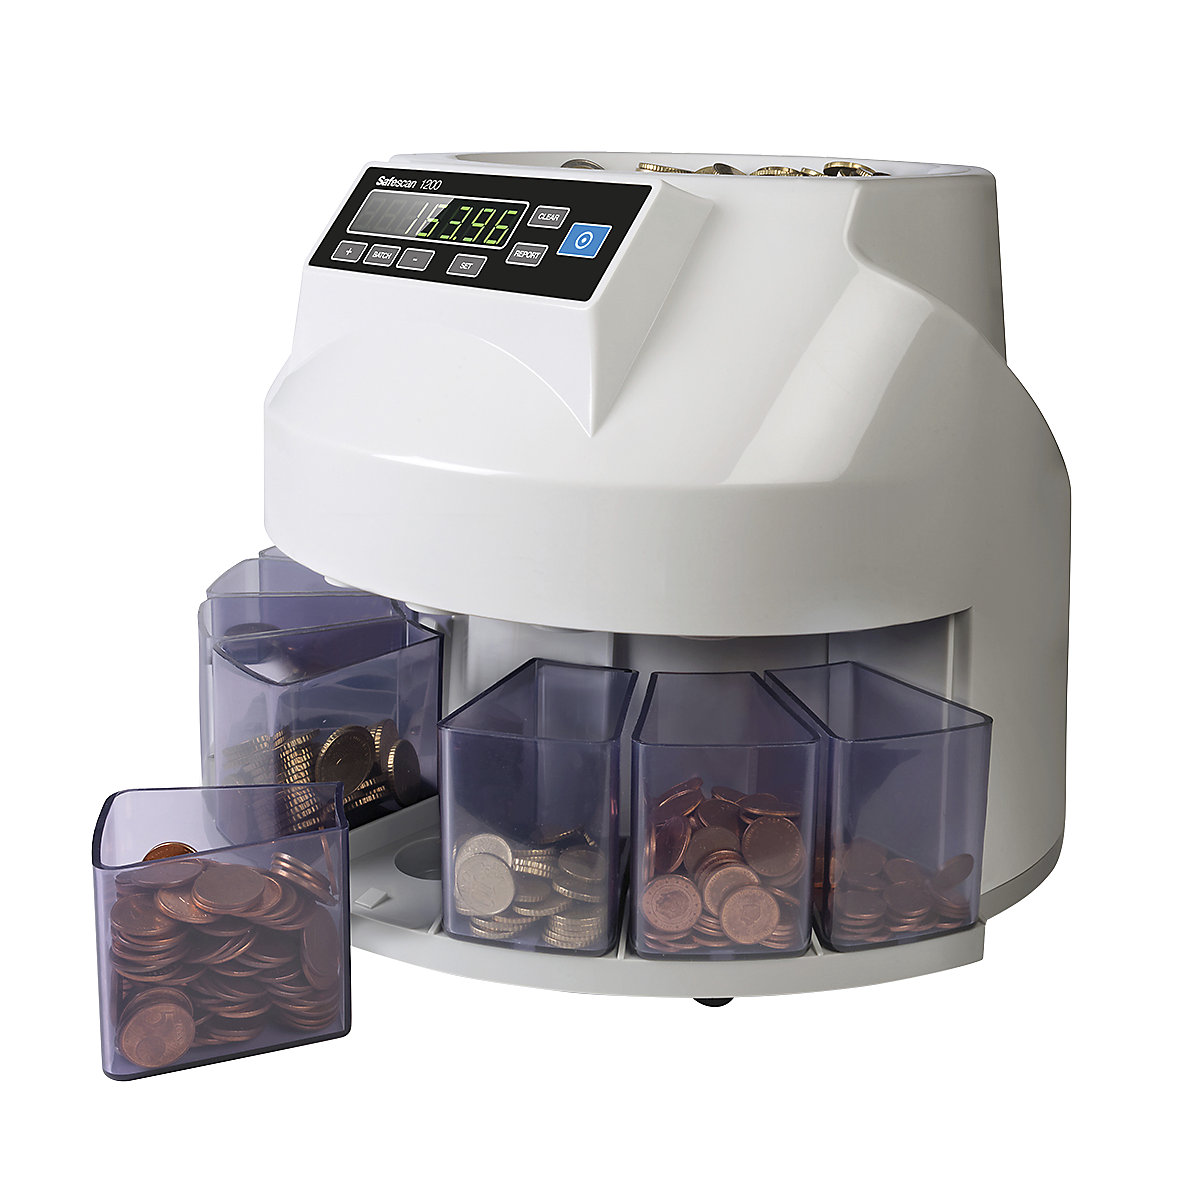 Coin counters and sorters - Safescan